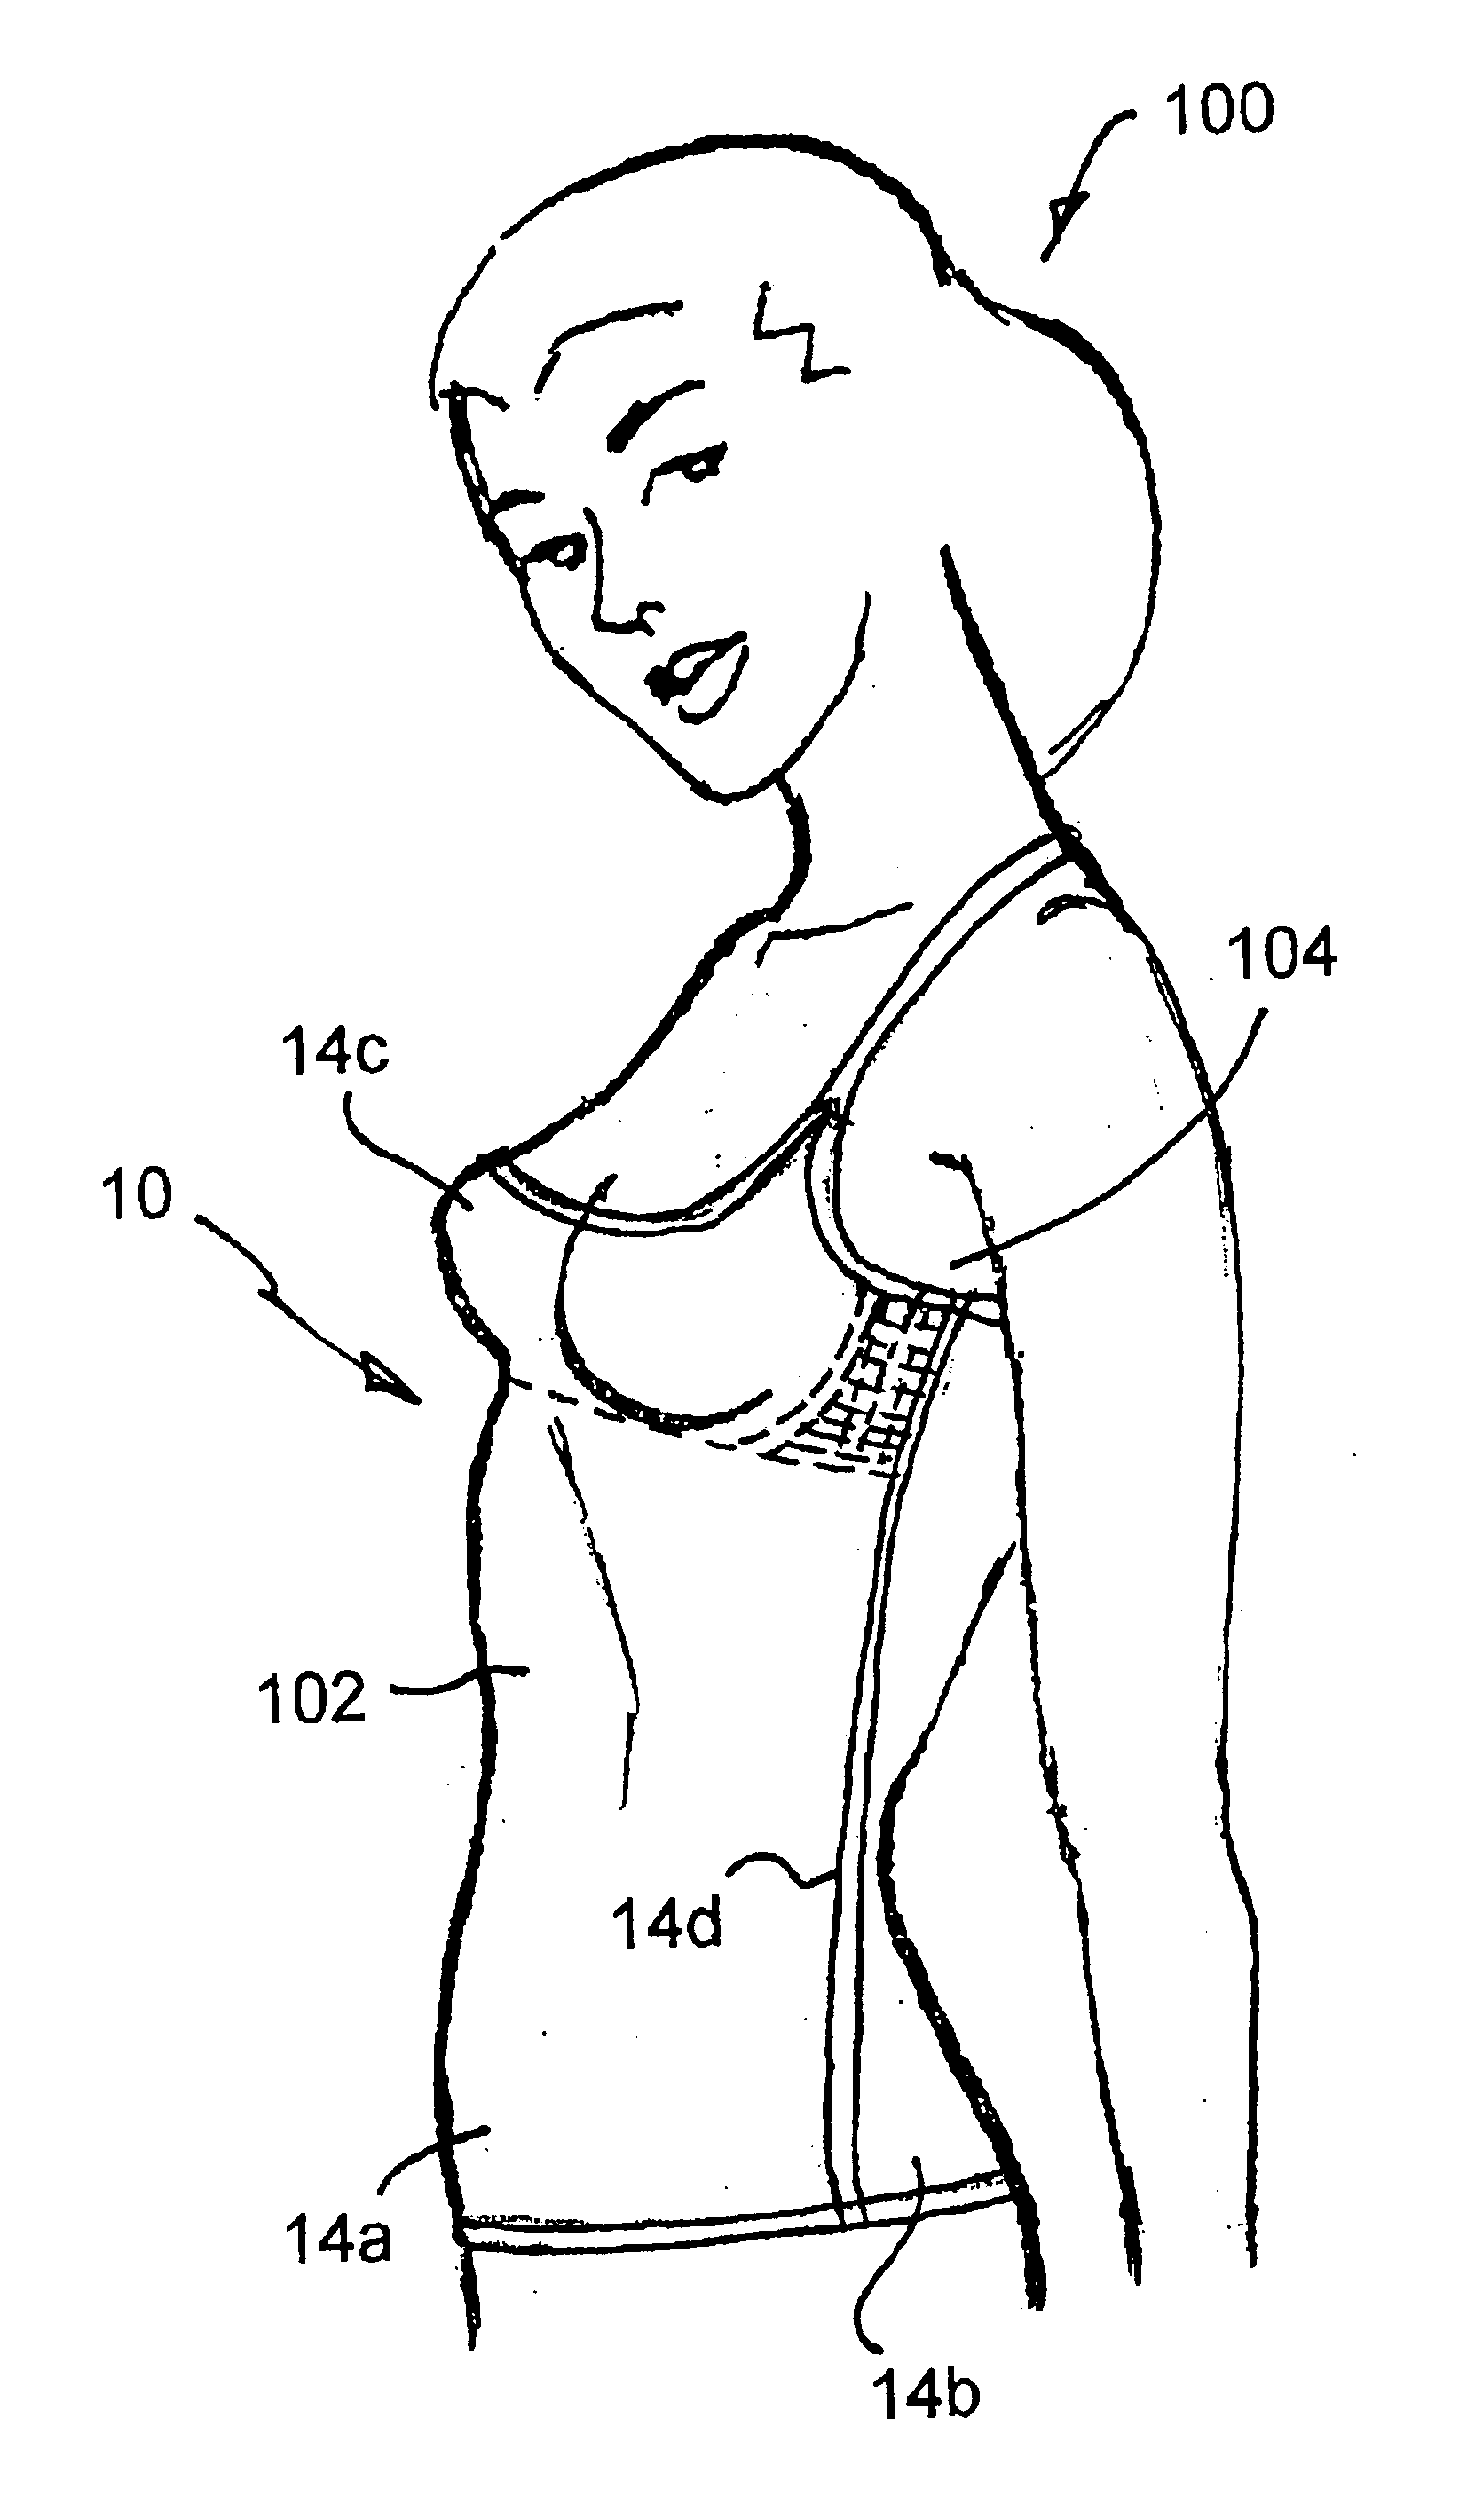 Garment with interior bra structure with side supports